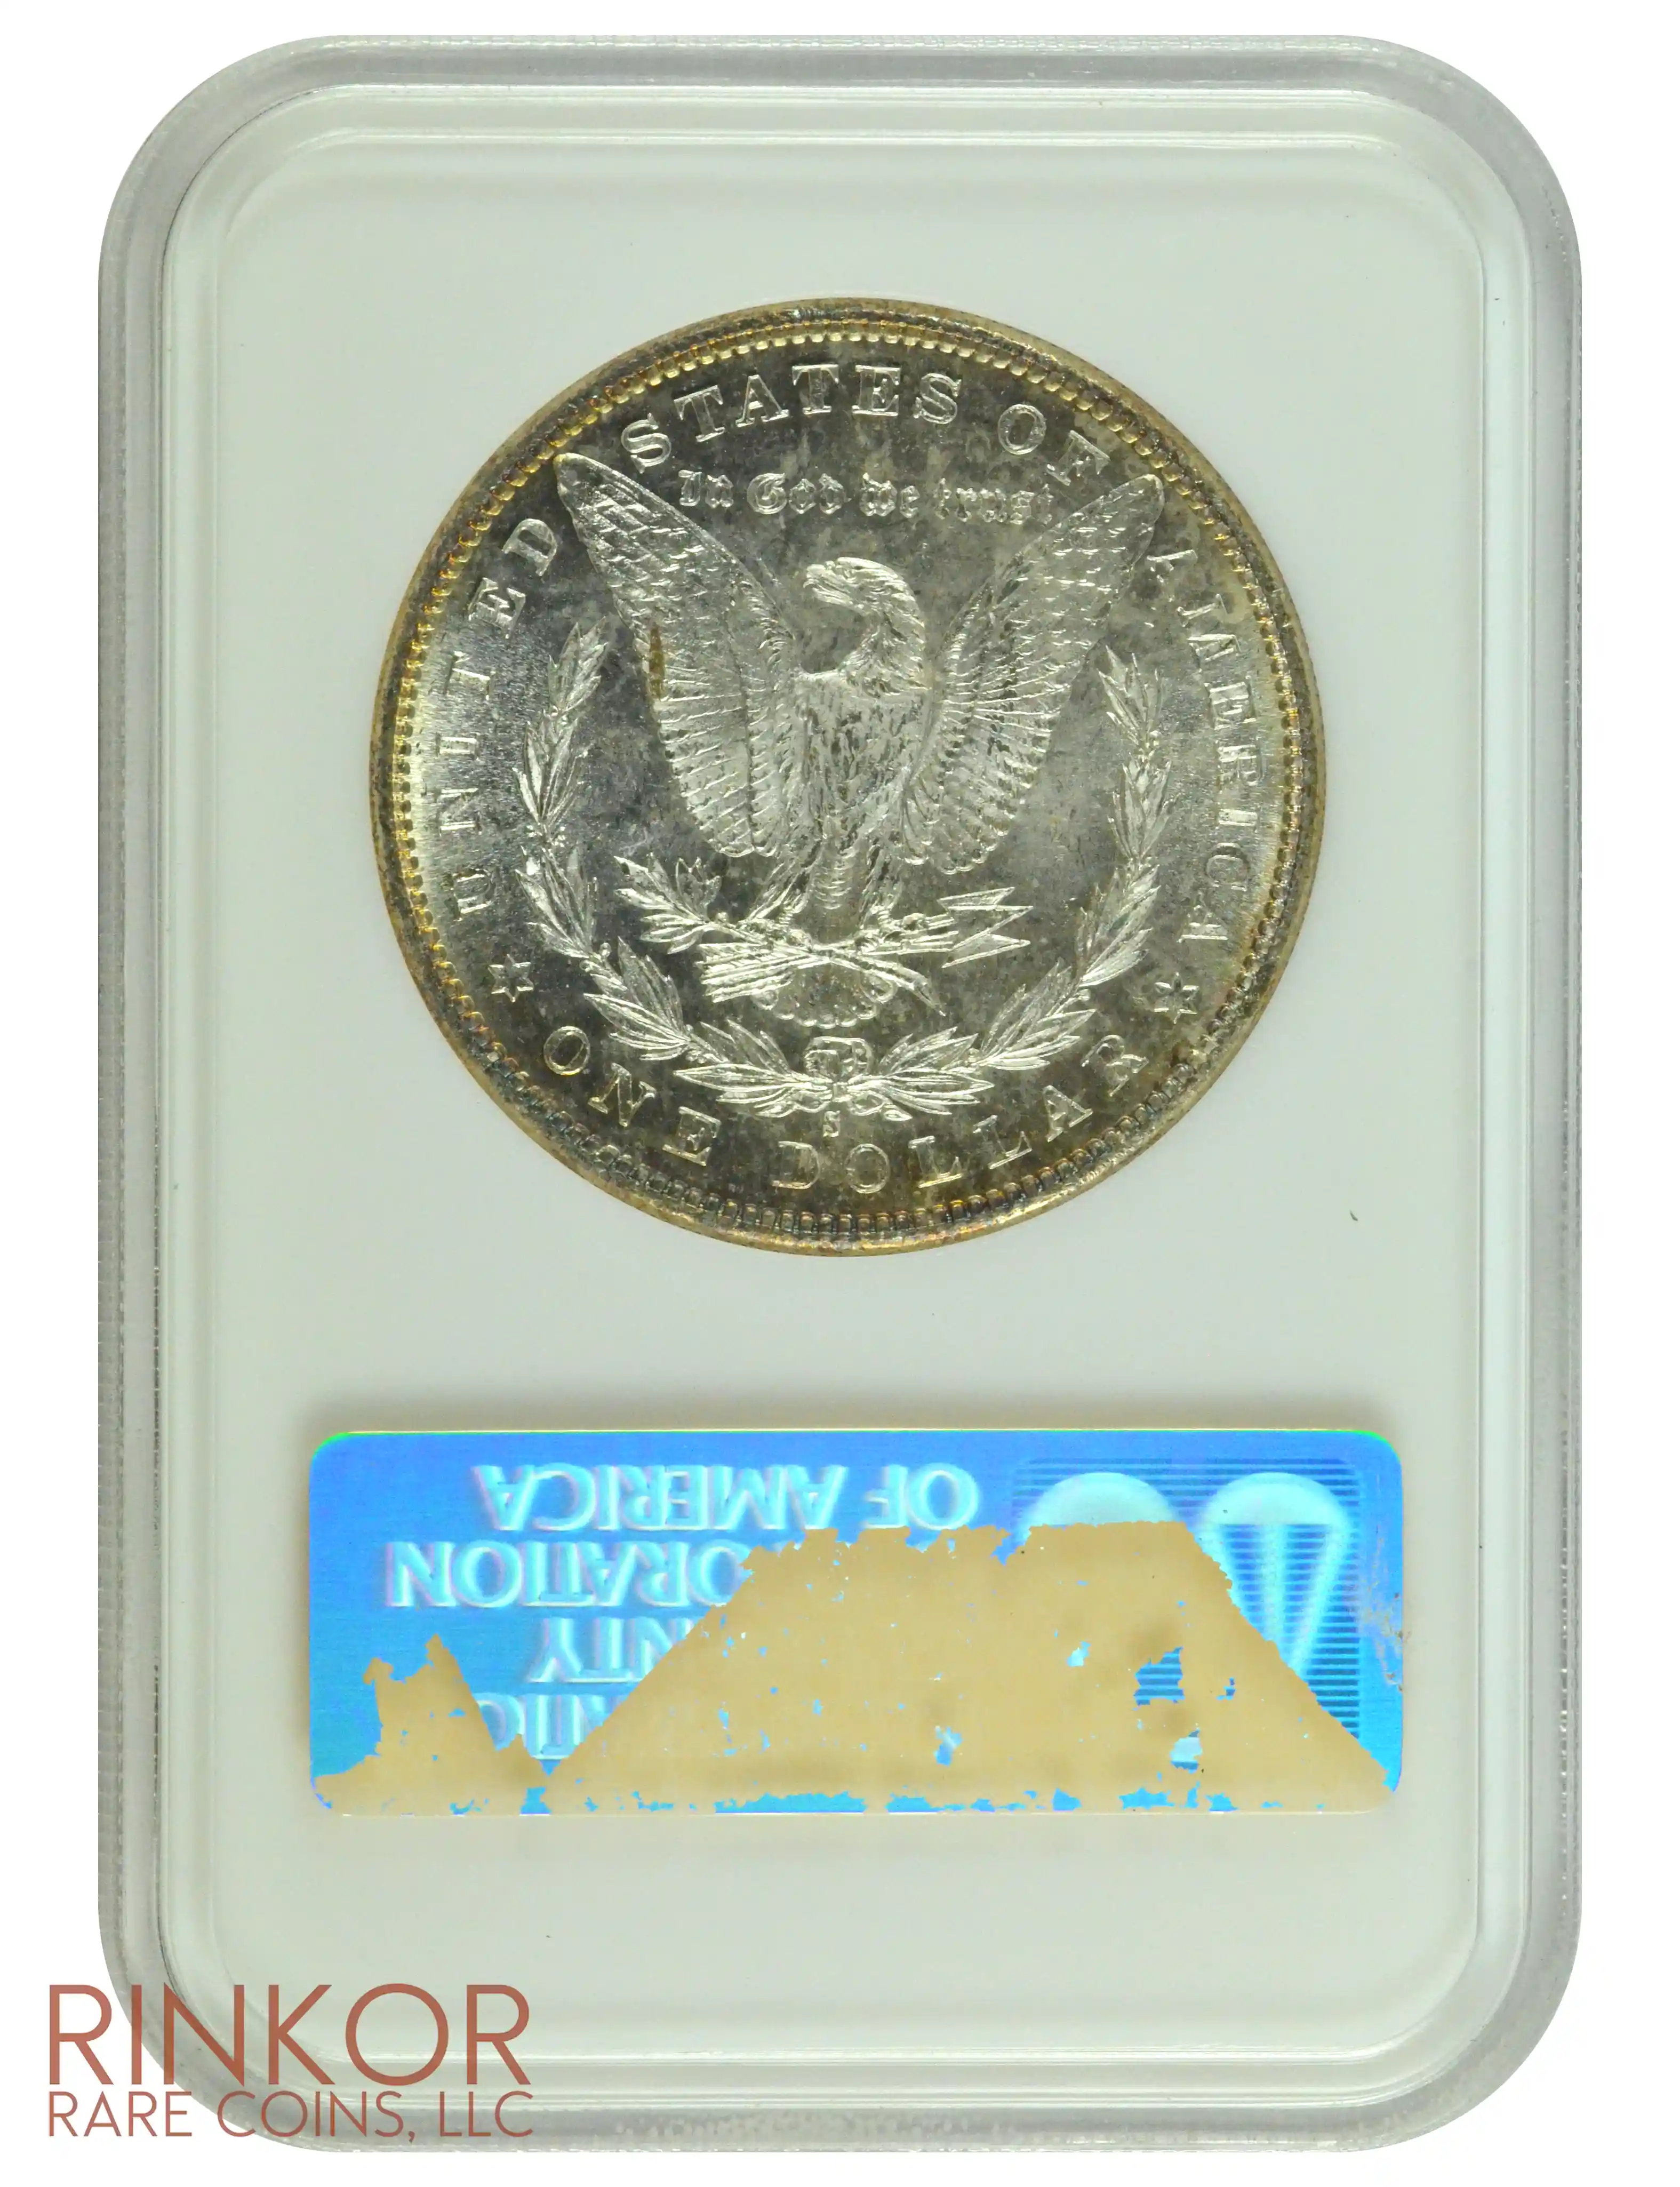 1881-S $1 NGC MS 64 PL CAC